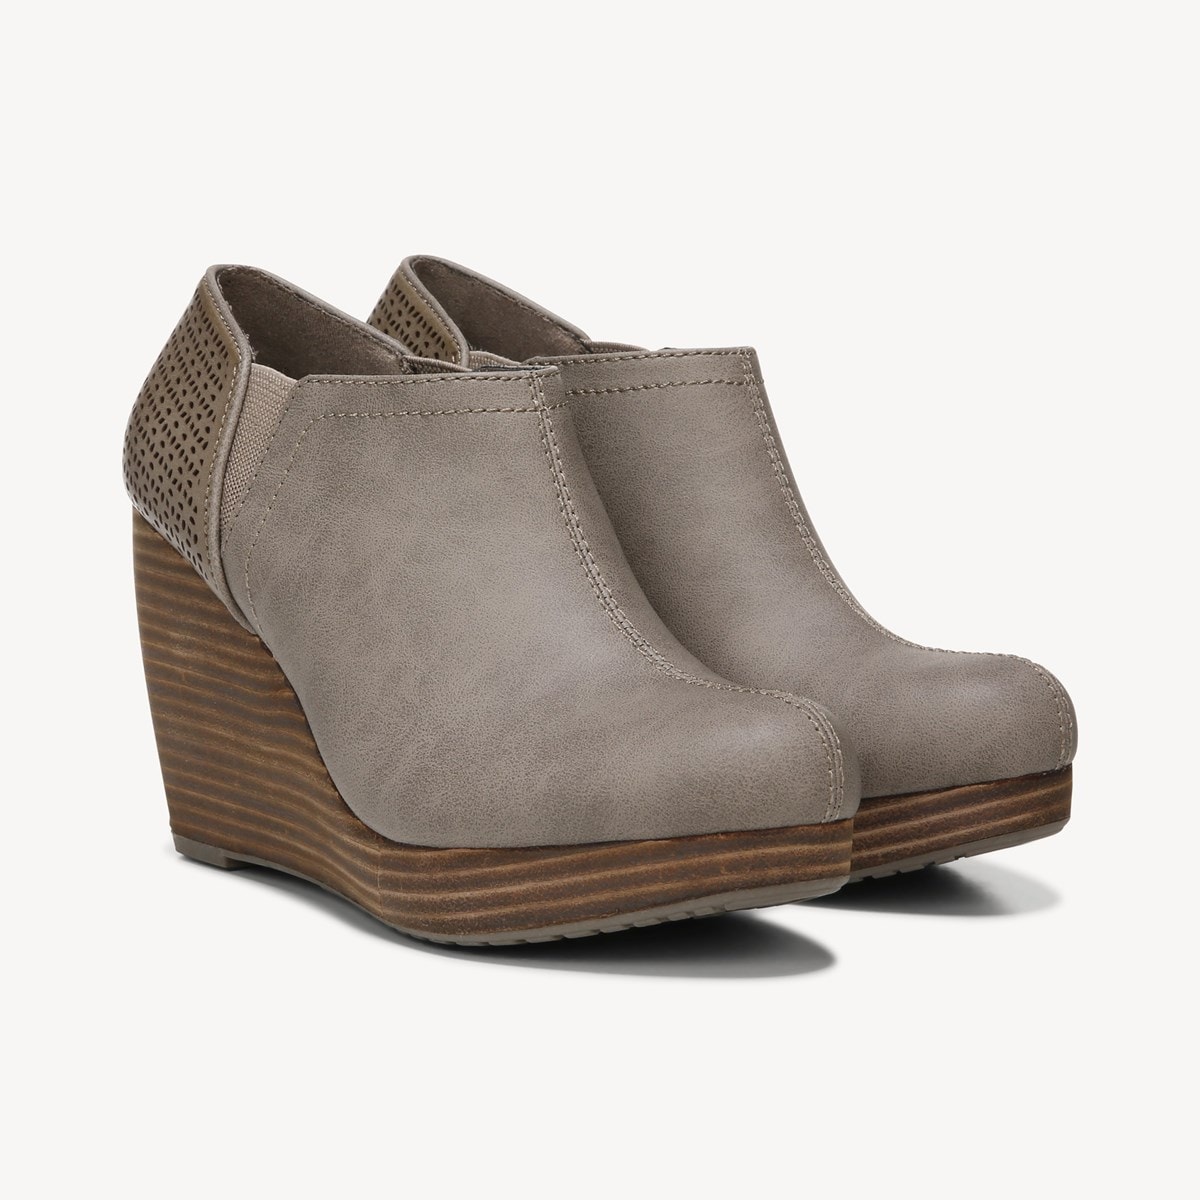 American Lifestyle Harlow Wedge Bootie 